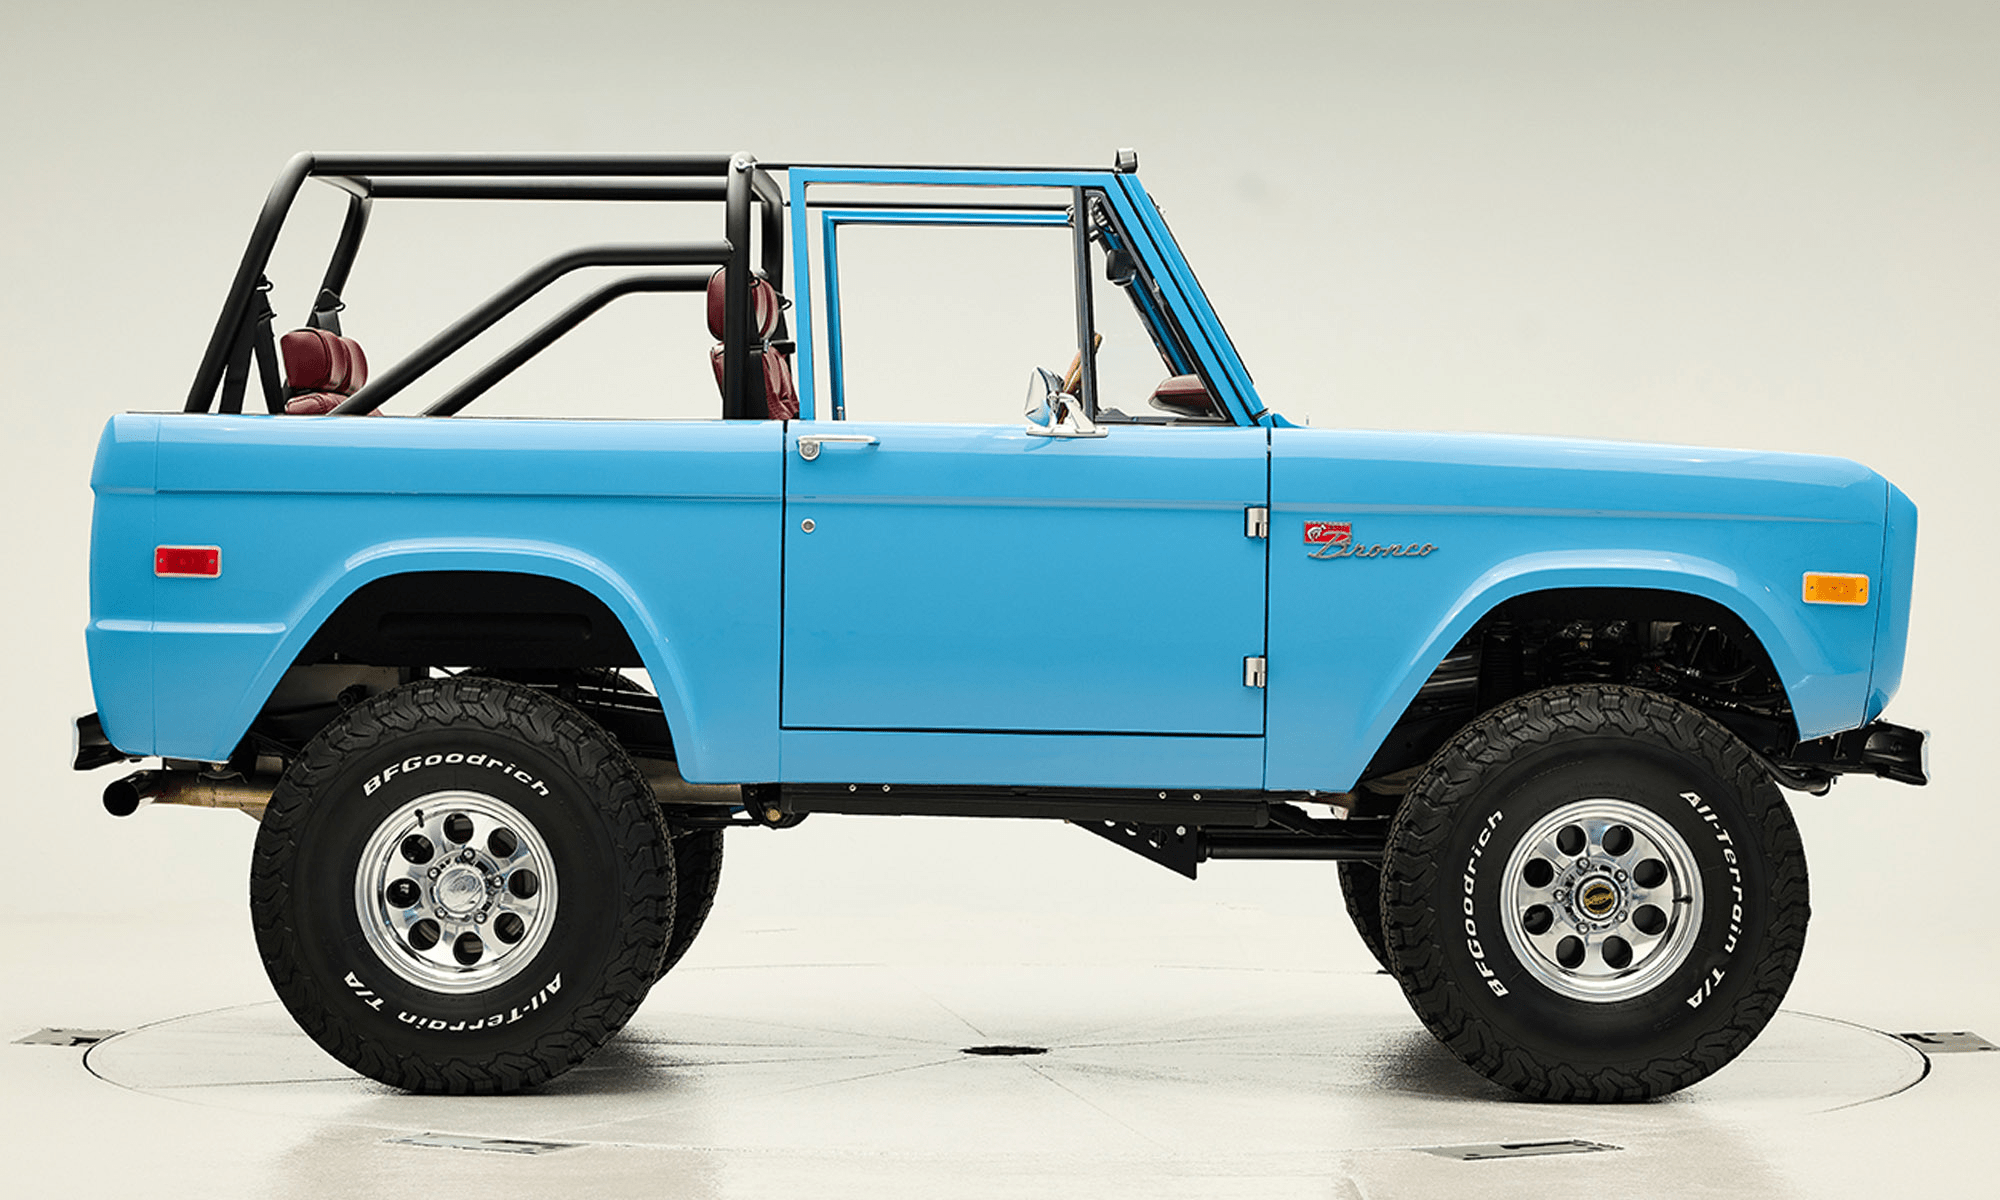 1969 Blue Classic Ford Broncos Coyote Series with Burgundy custom interior, manual transmission and a family roll cage